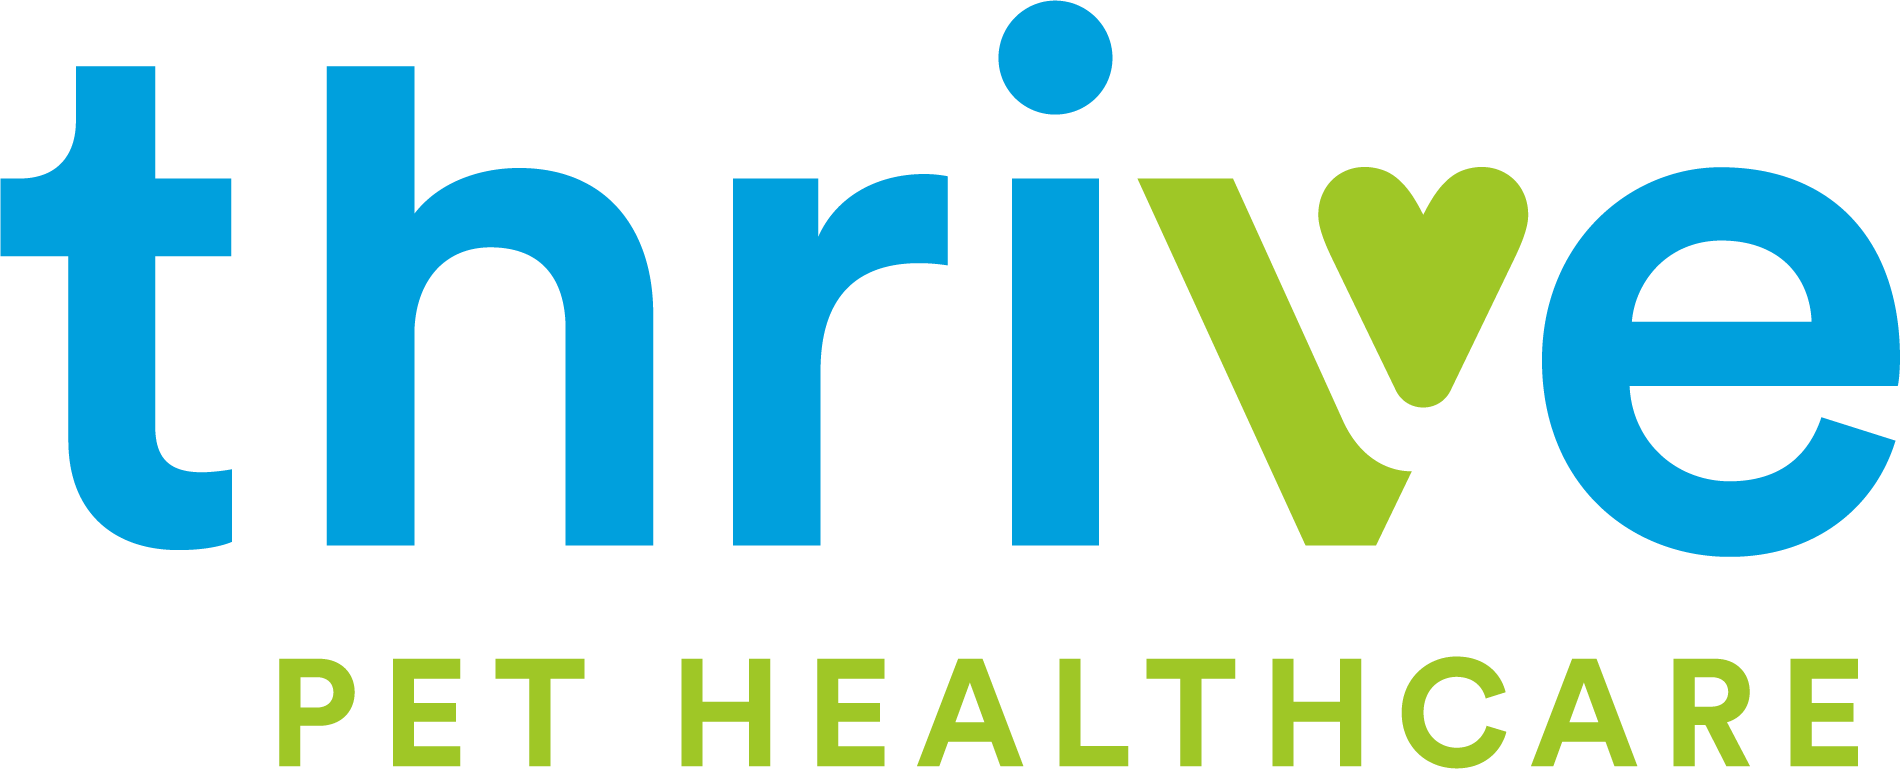 Thrive Pet Healthcare names new CEO